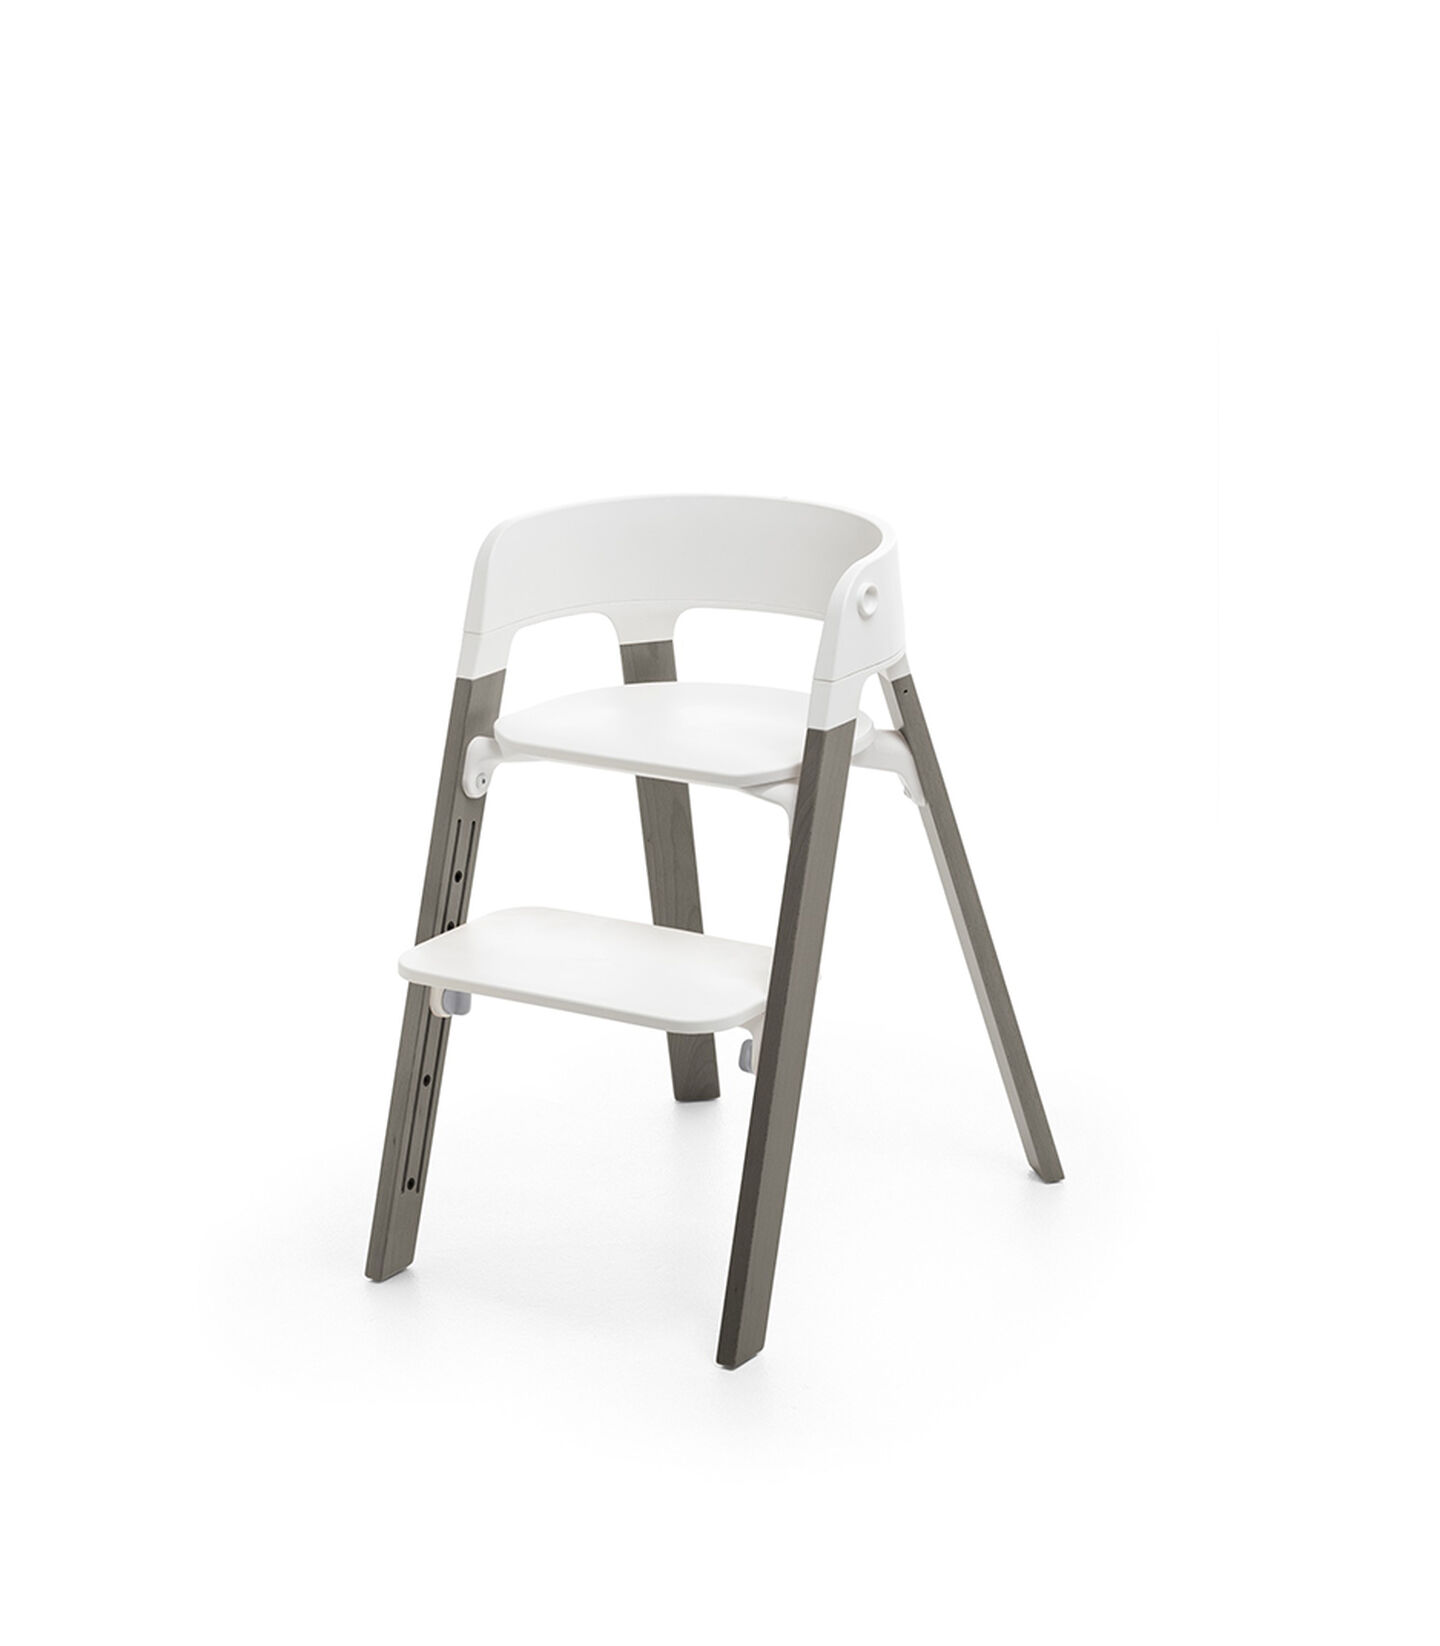 Stokke® Steps™ Chair White Hazy Grey, Blanc/Gris Brume, mainview view 1